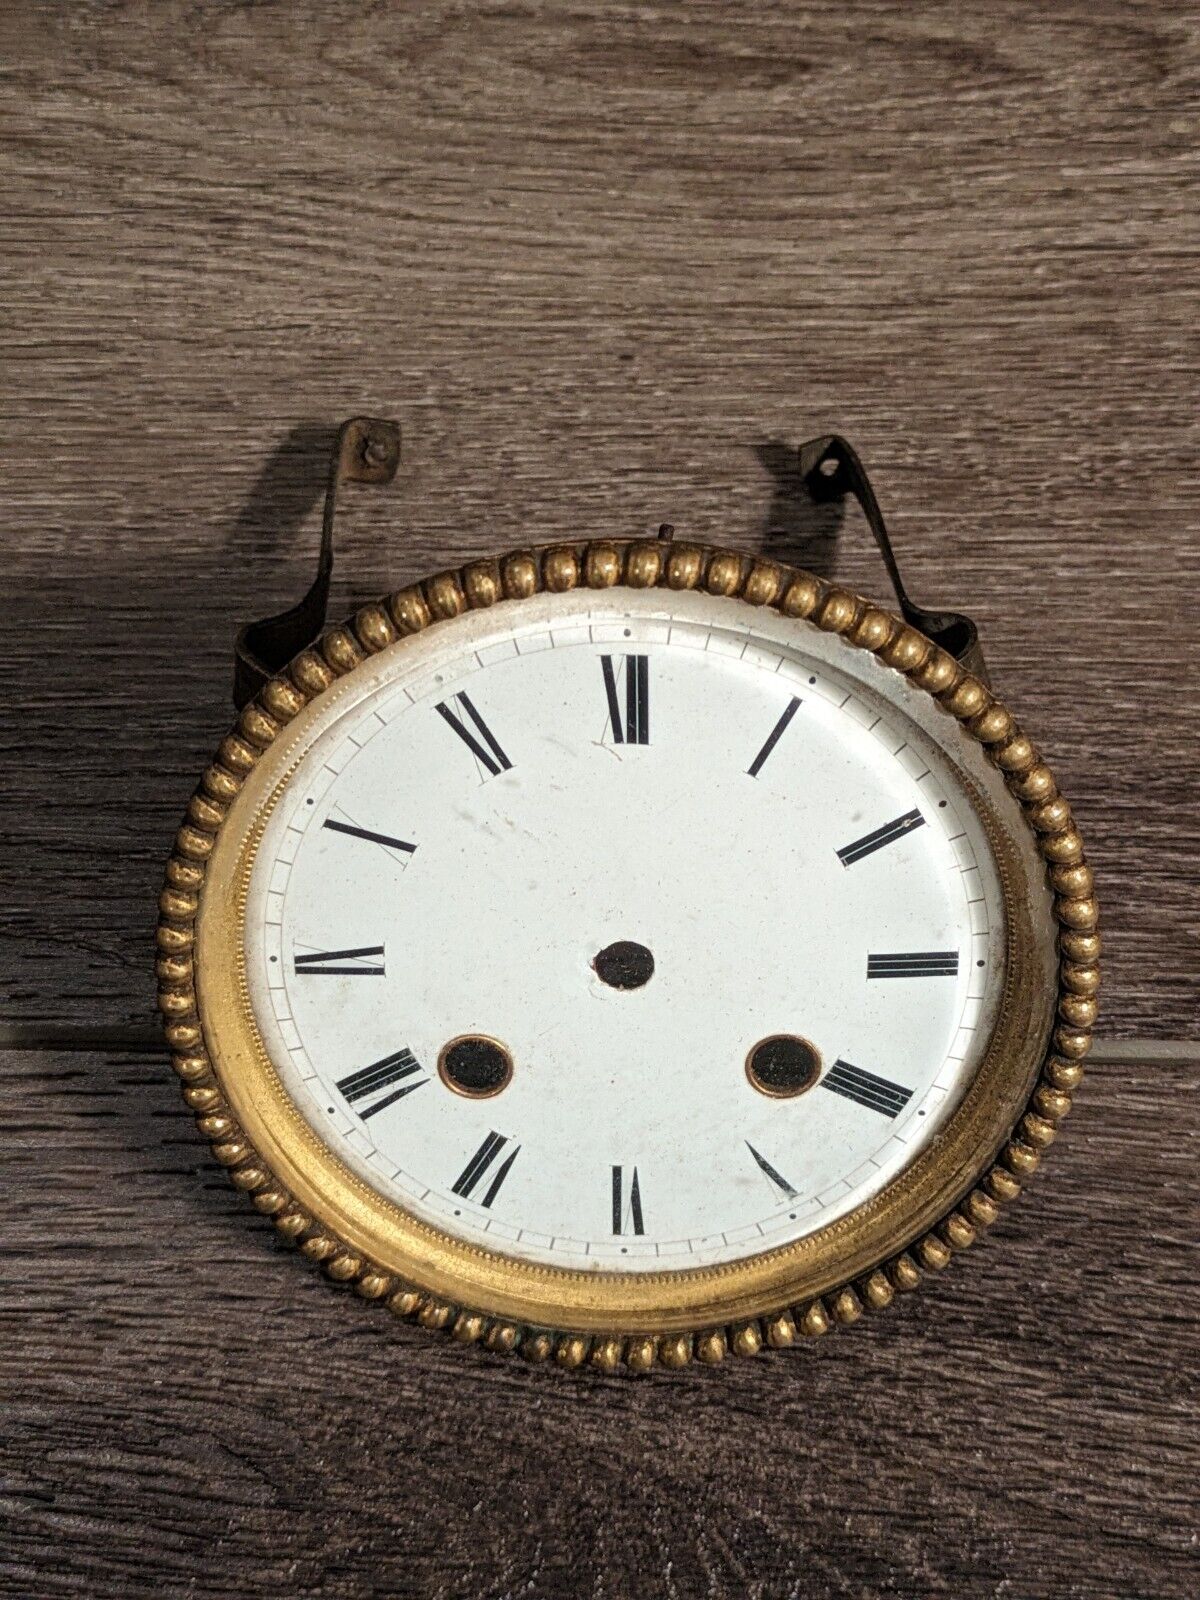 Gorgeous old antique clock face dial, likely mid to late 1800s and likely French